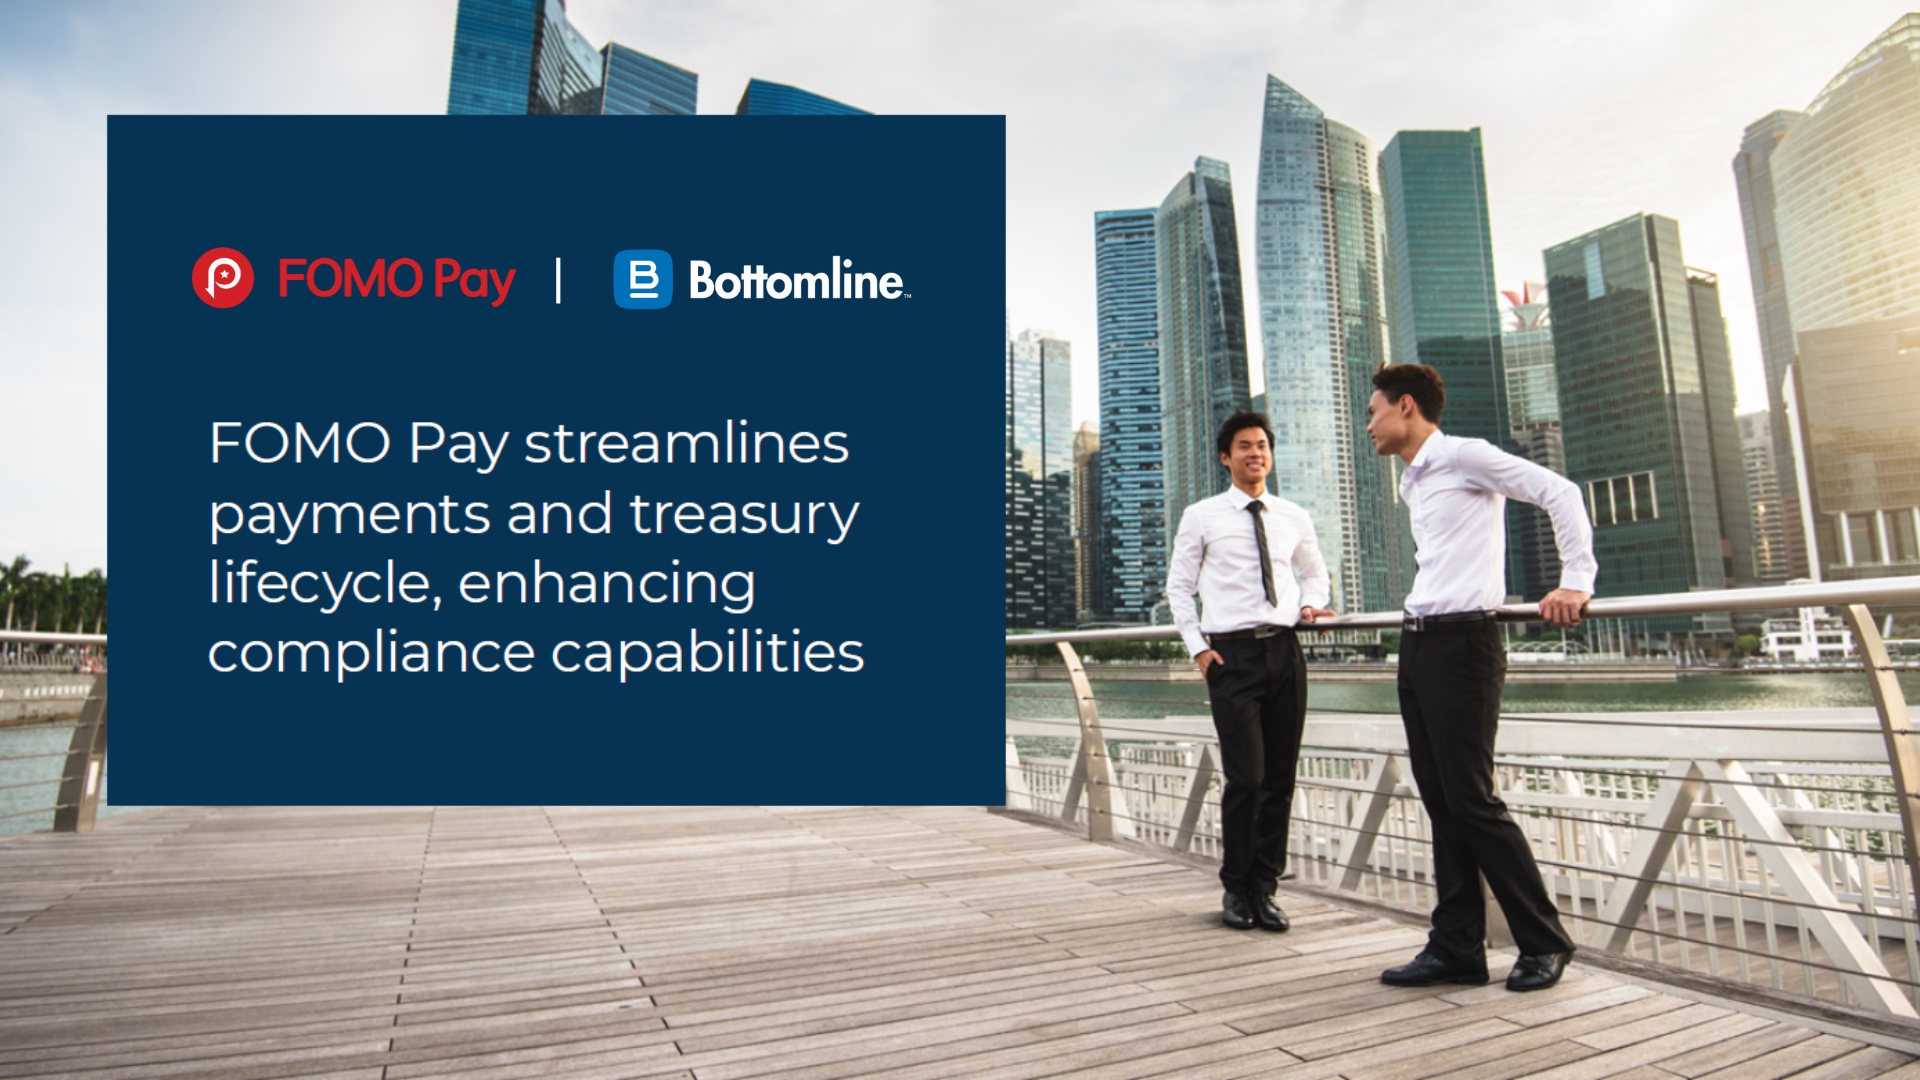 FOMO Pay streamlines payments and treasury lifecycle with Bottomline solution, enhancing compliance capabilities